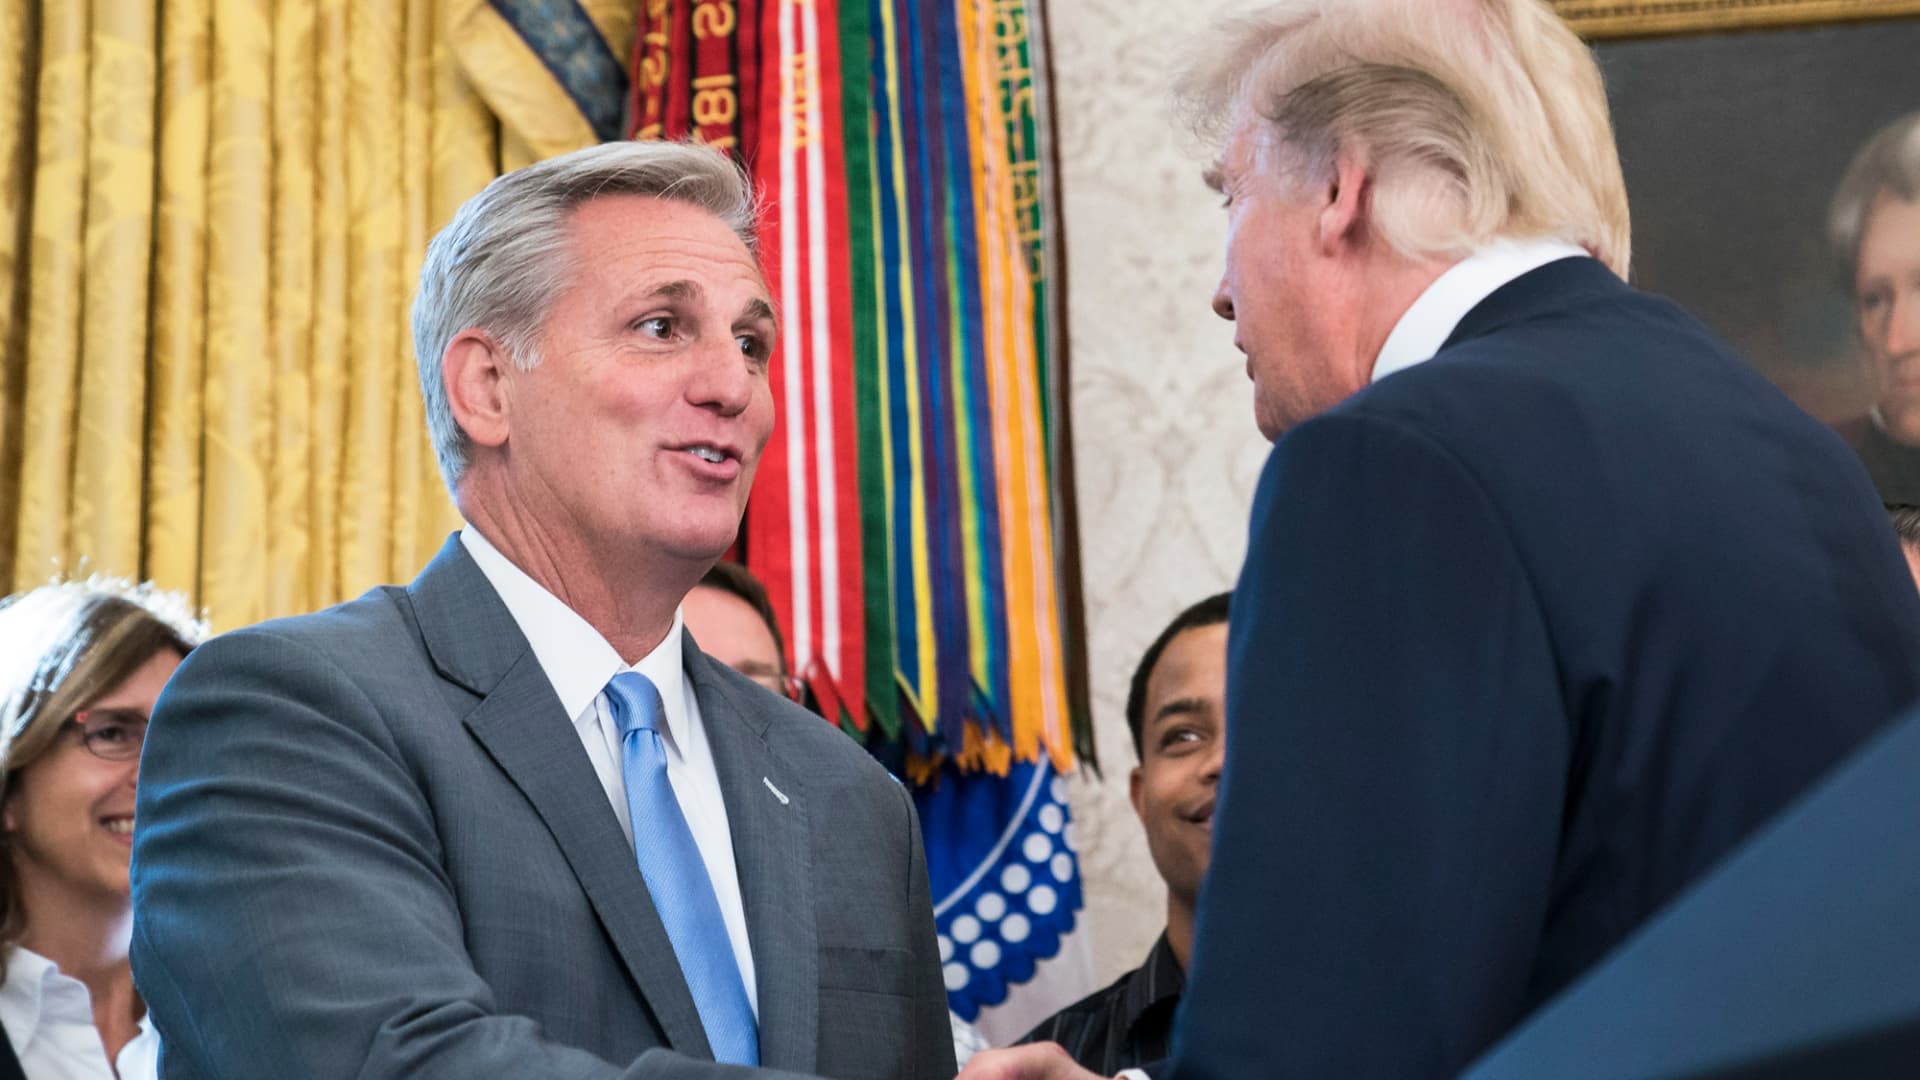 President Donald Trump greets House Majority Leader Kevin McCarthy, R-Calif., as he arrives at an event to announce that Broadcom is moving its global headquarters to the United States, in the Oval Office at the White House in Washington, DC on Thursday, Nov. 02, 2017.